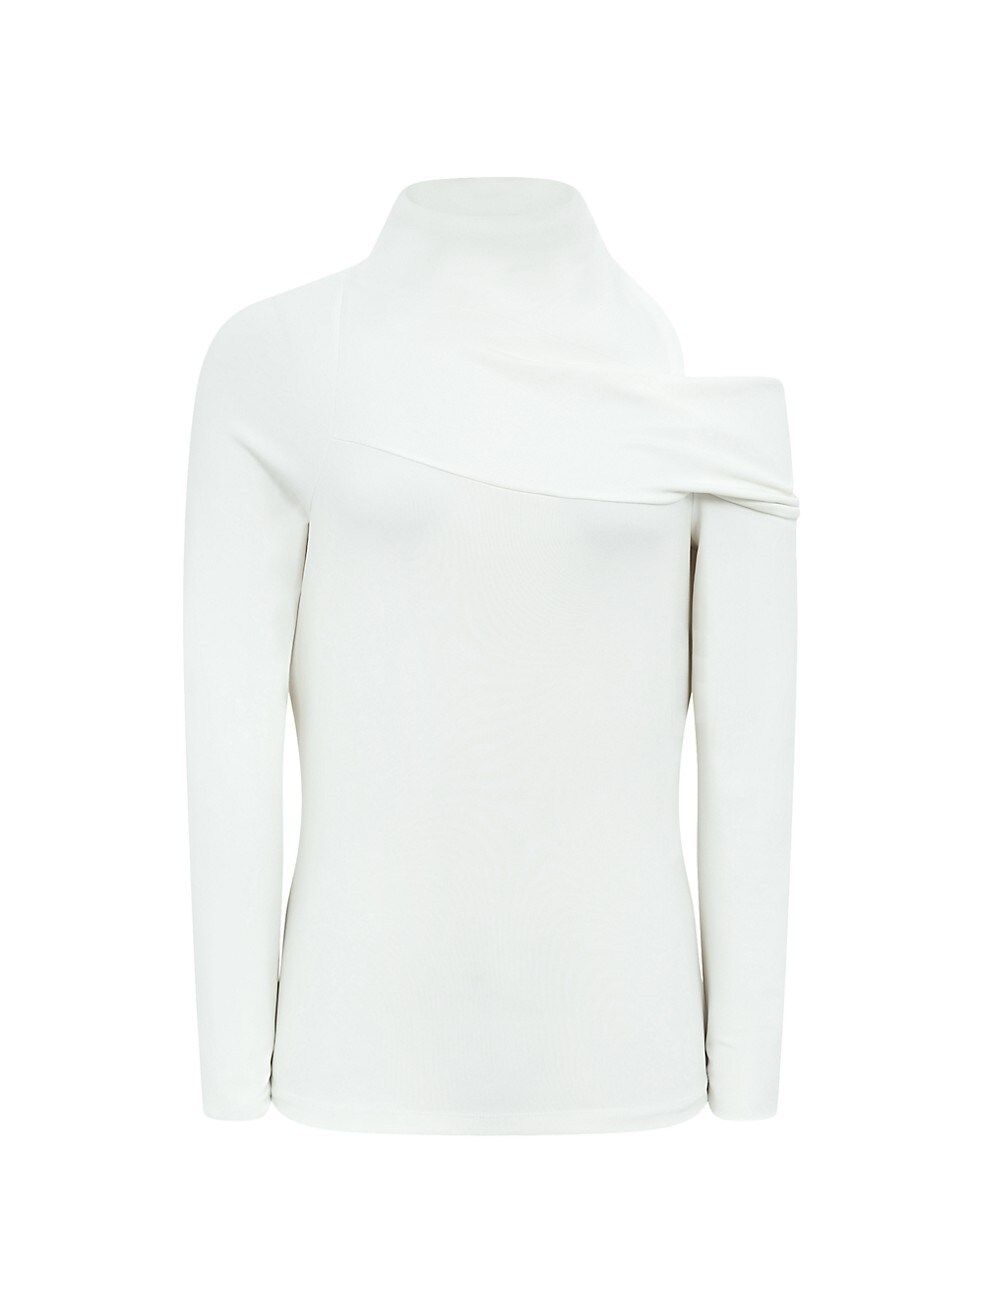 Reiss Amy Cut Out Turtleneck Top | Saks Fifth Avenue